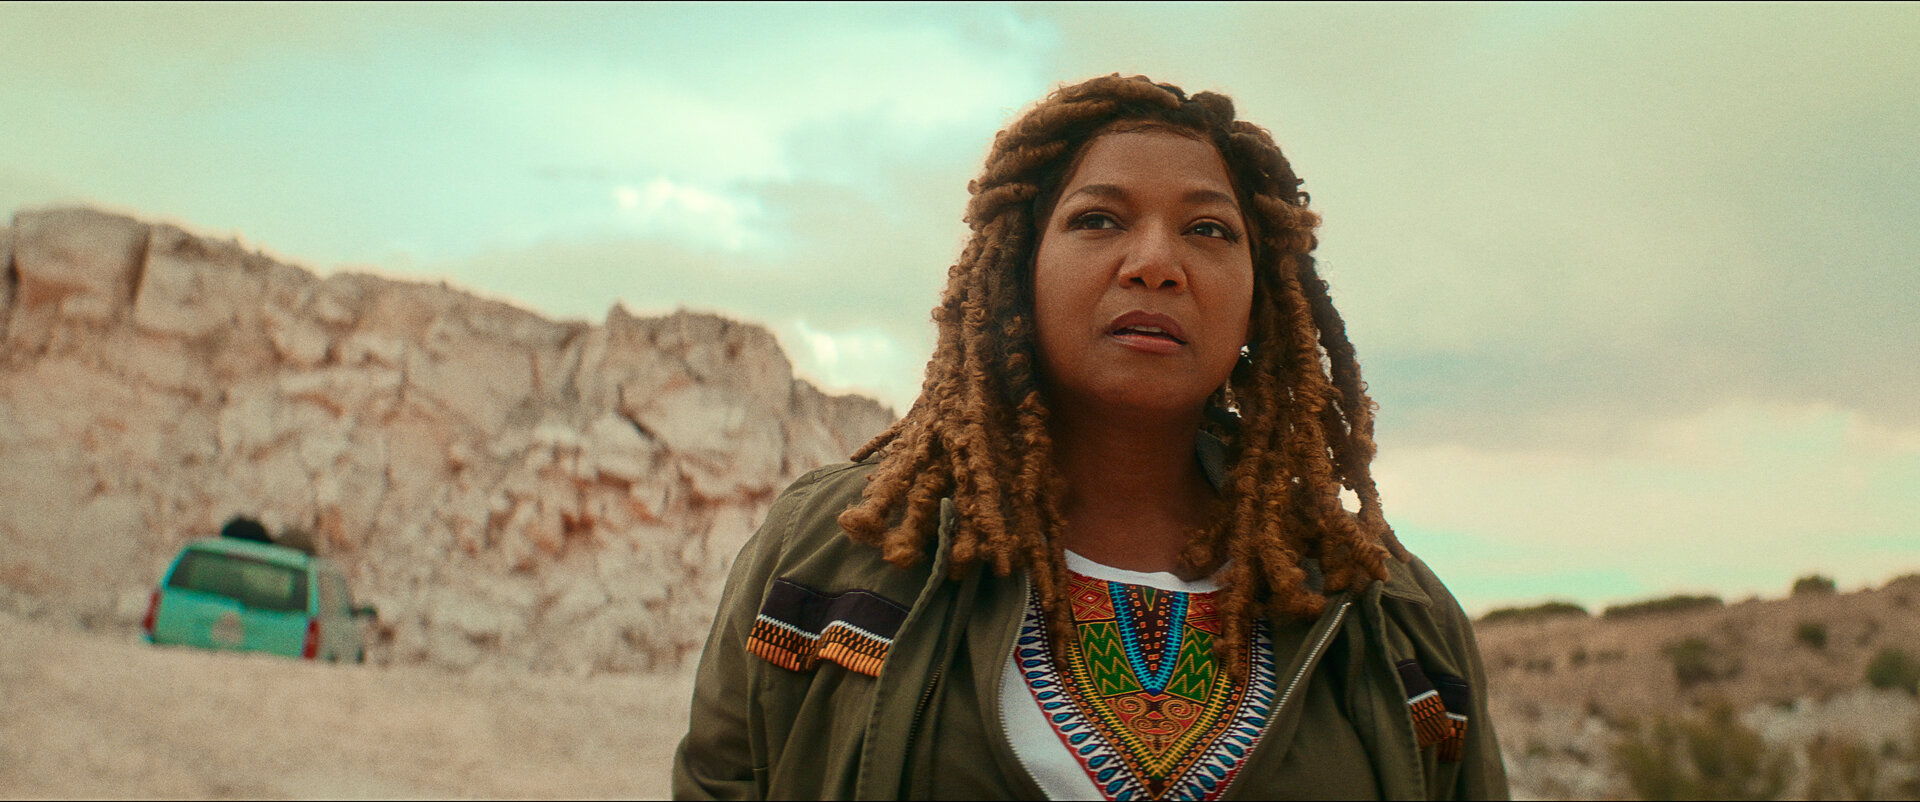 End of the Road Queen Latifah's Netflix film hits Top 10 in 80 countries